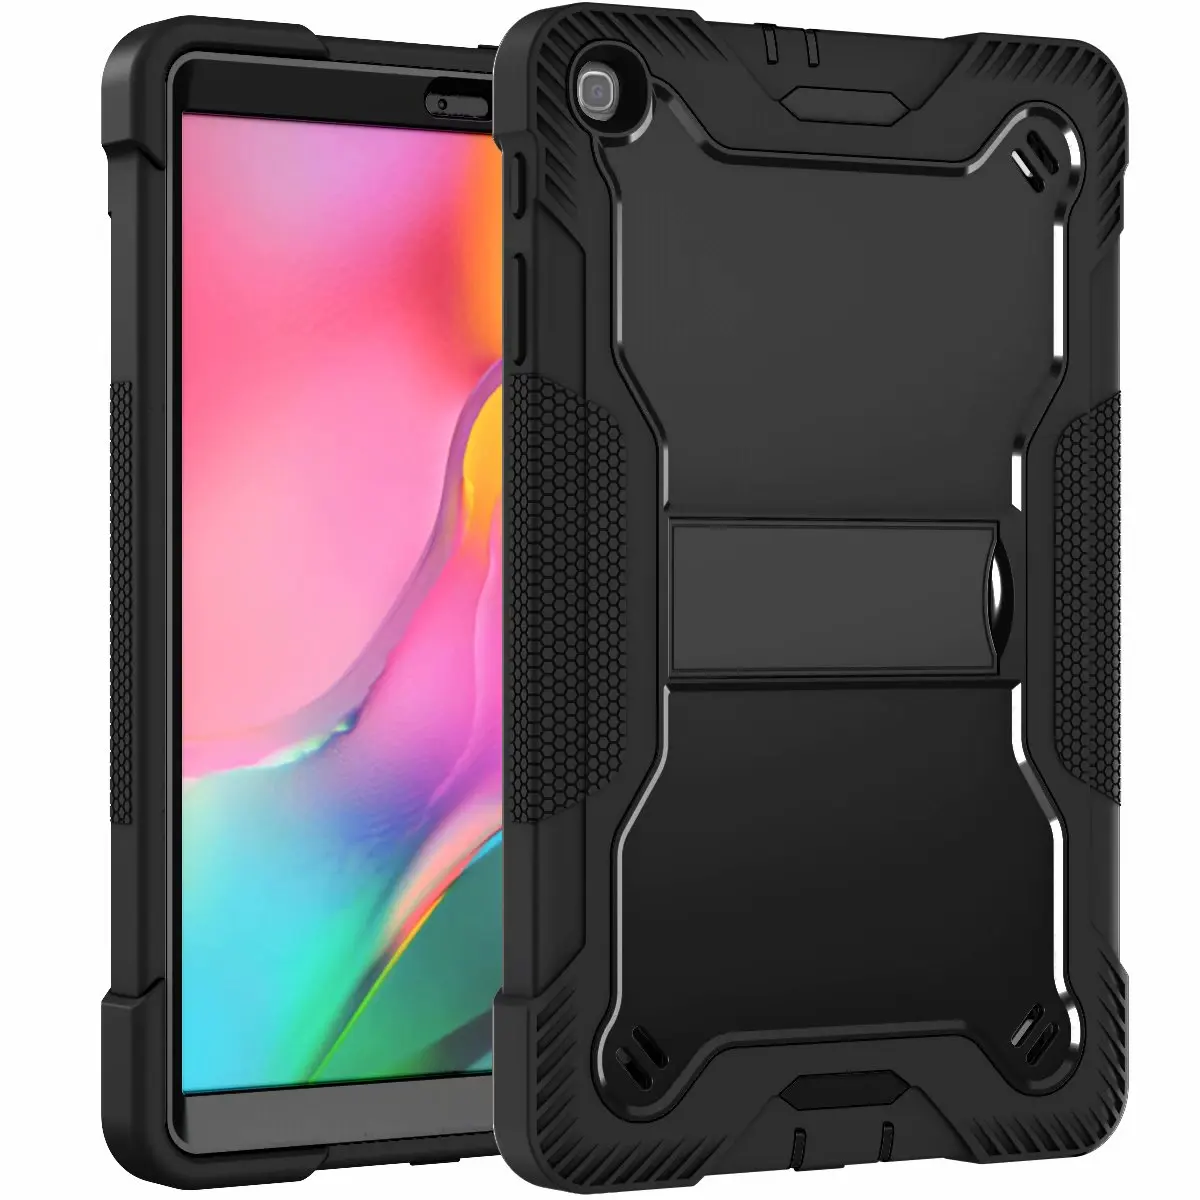 

Coque Shell For Samsung Galaxy Tab A 8.0 2019 A 8 SM-T290 SM-T295 T297 Armor Case tablet PC Back Cover for Samsung Tab A8 Case